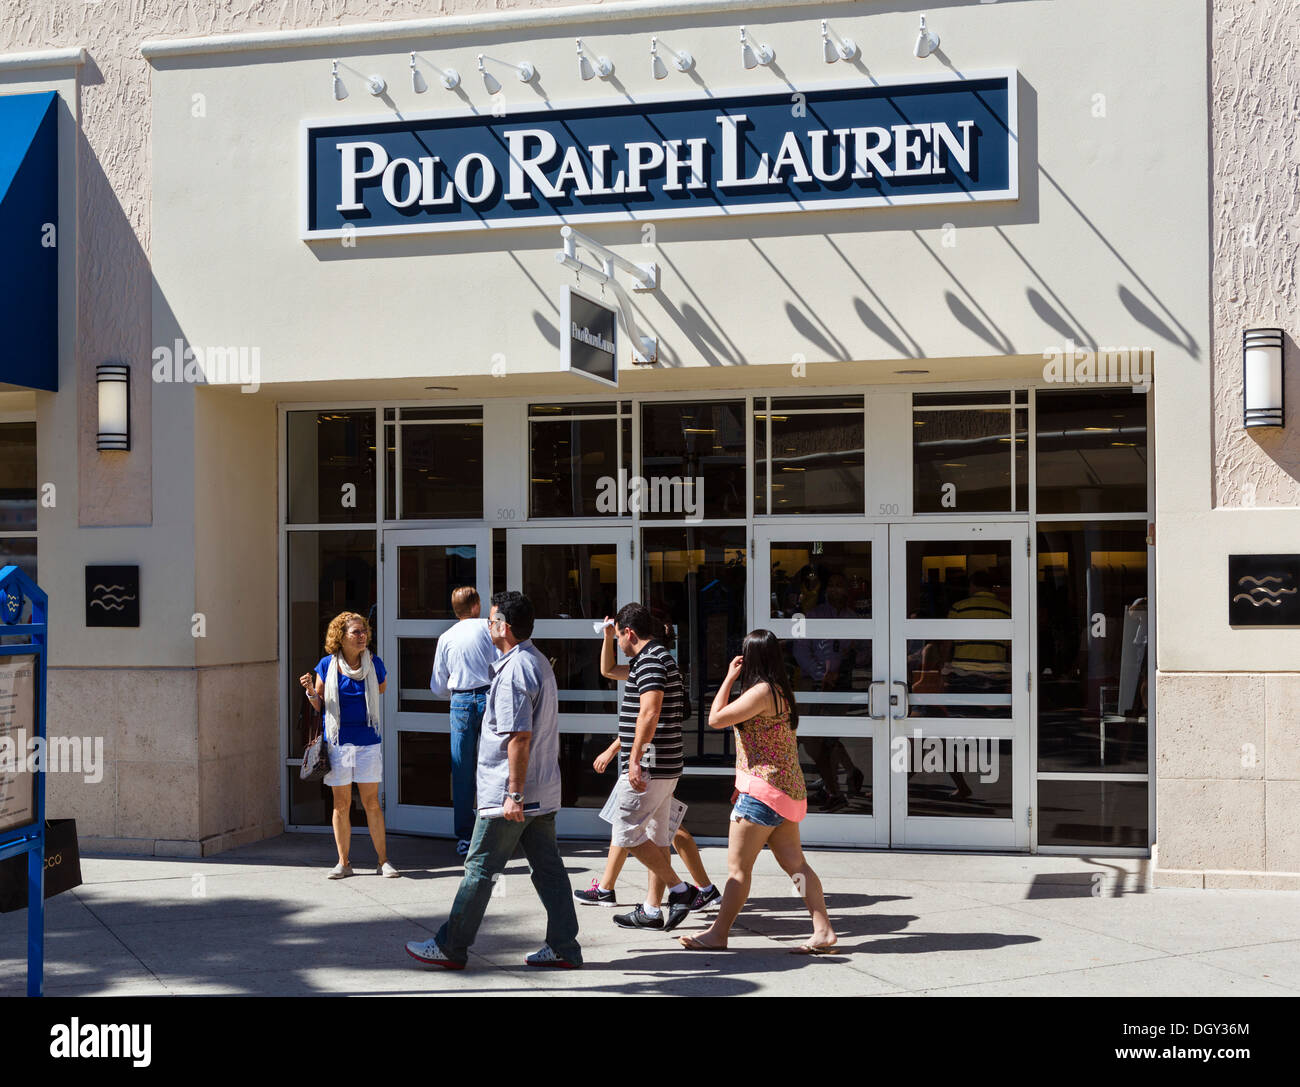 Polo Ralph Lauren Outlet Store At Orlando Premium Outlets Mall Vineland DGY36M 